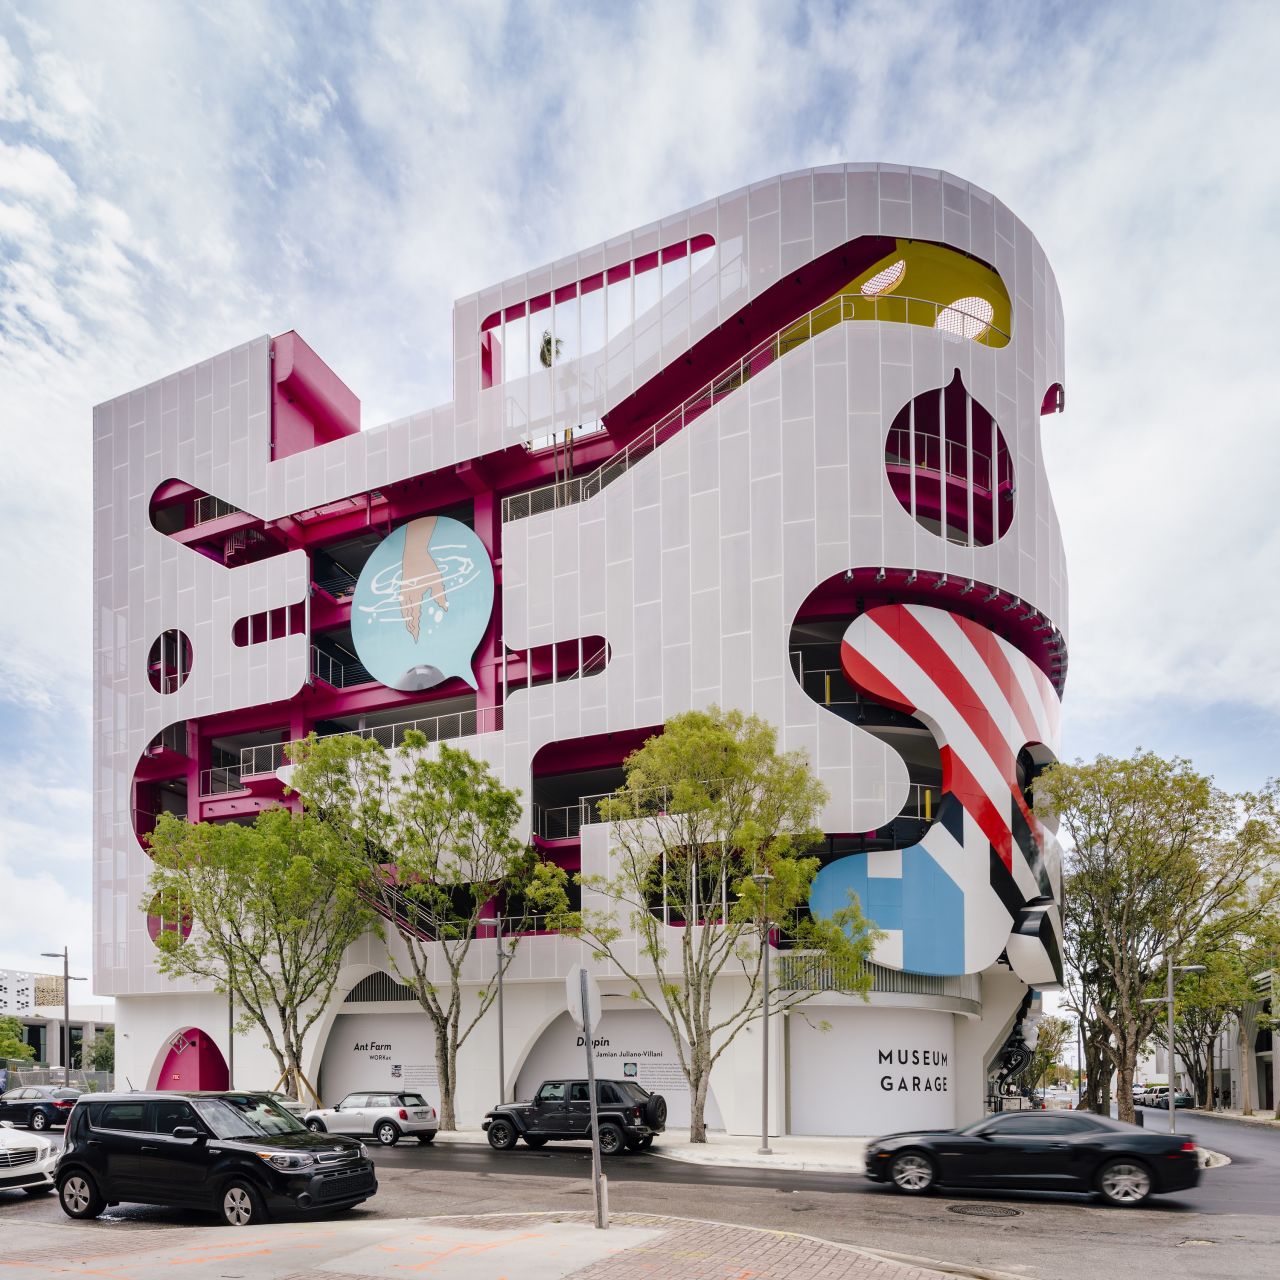 The Miami College Garage, a multi-story car park in Miami's design district, is among the Architecture nominees.